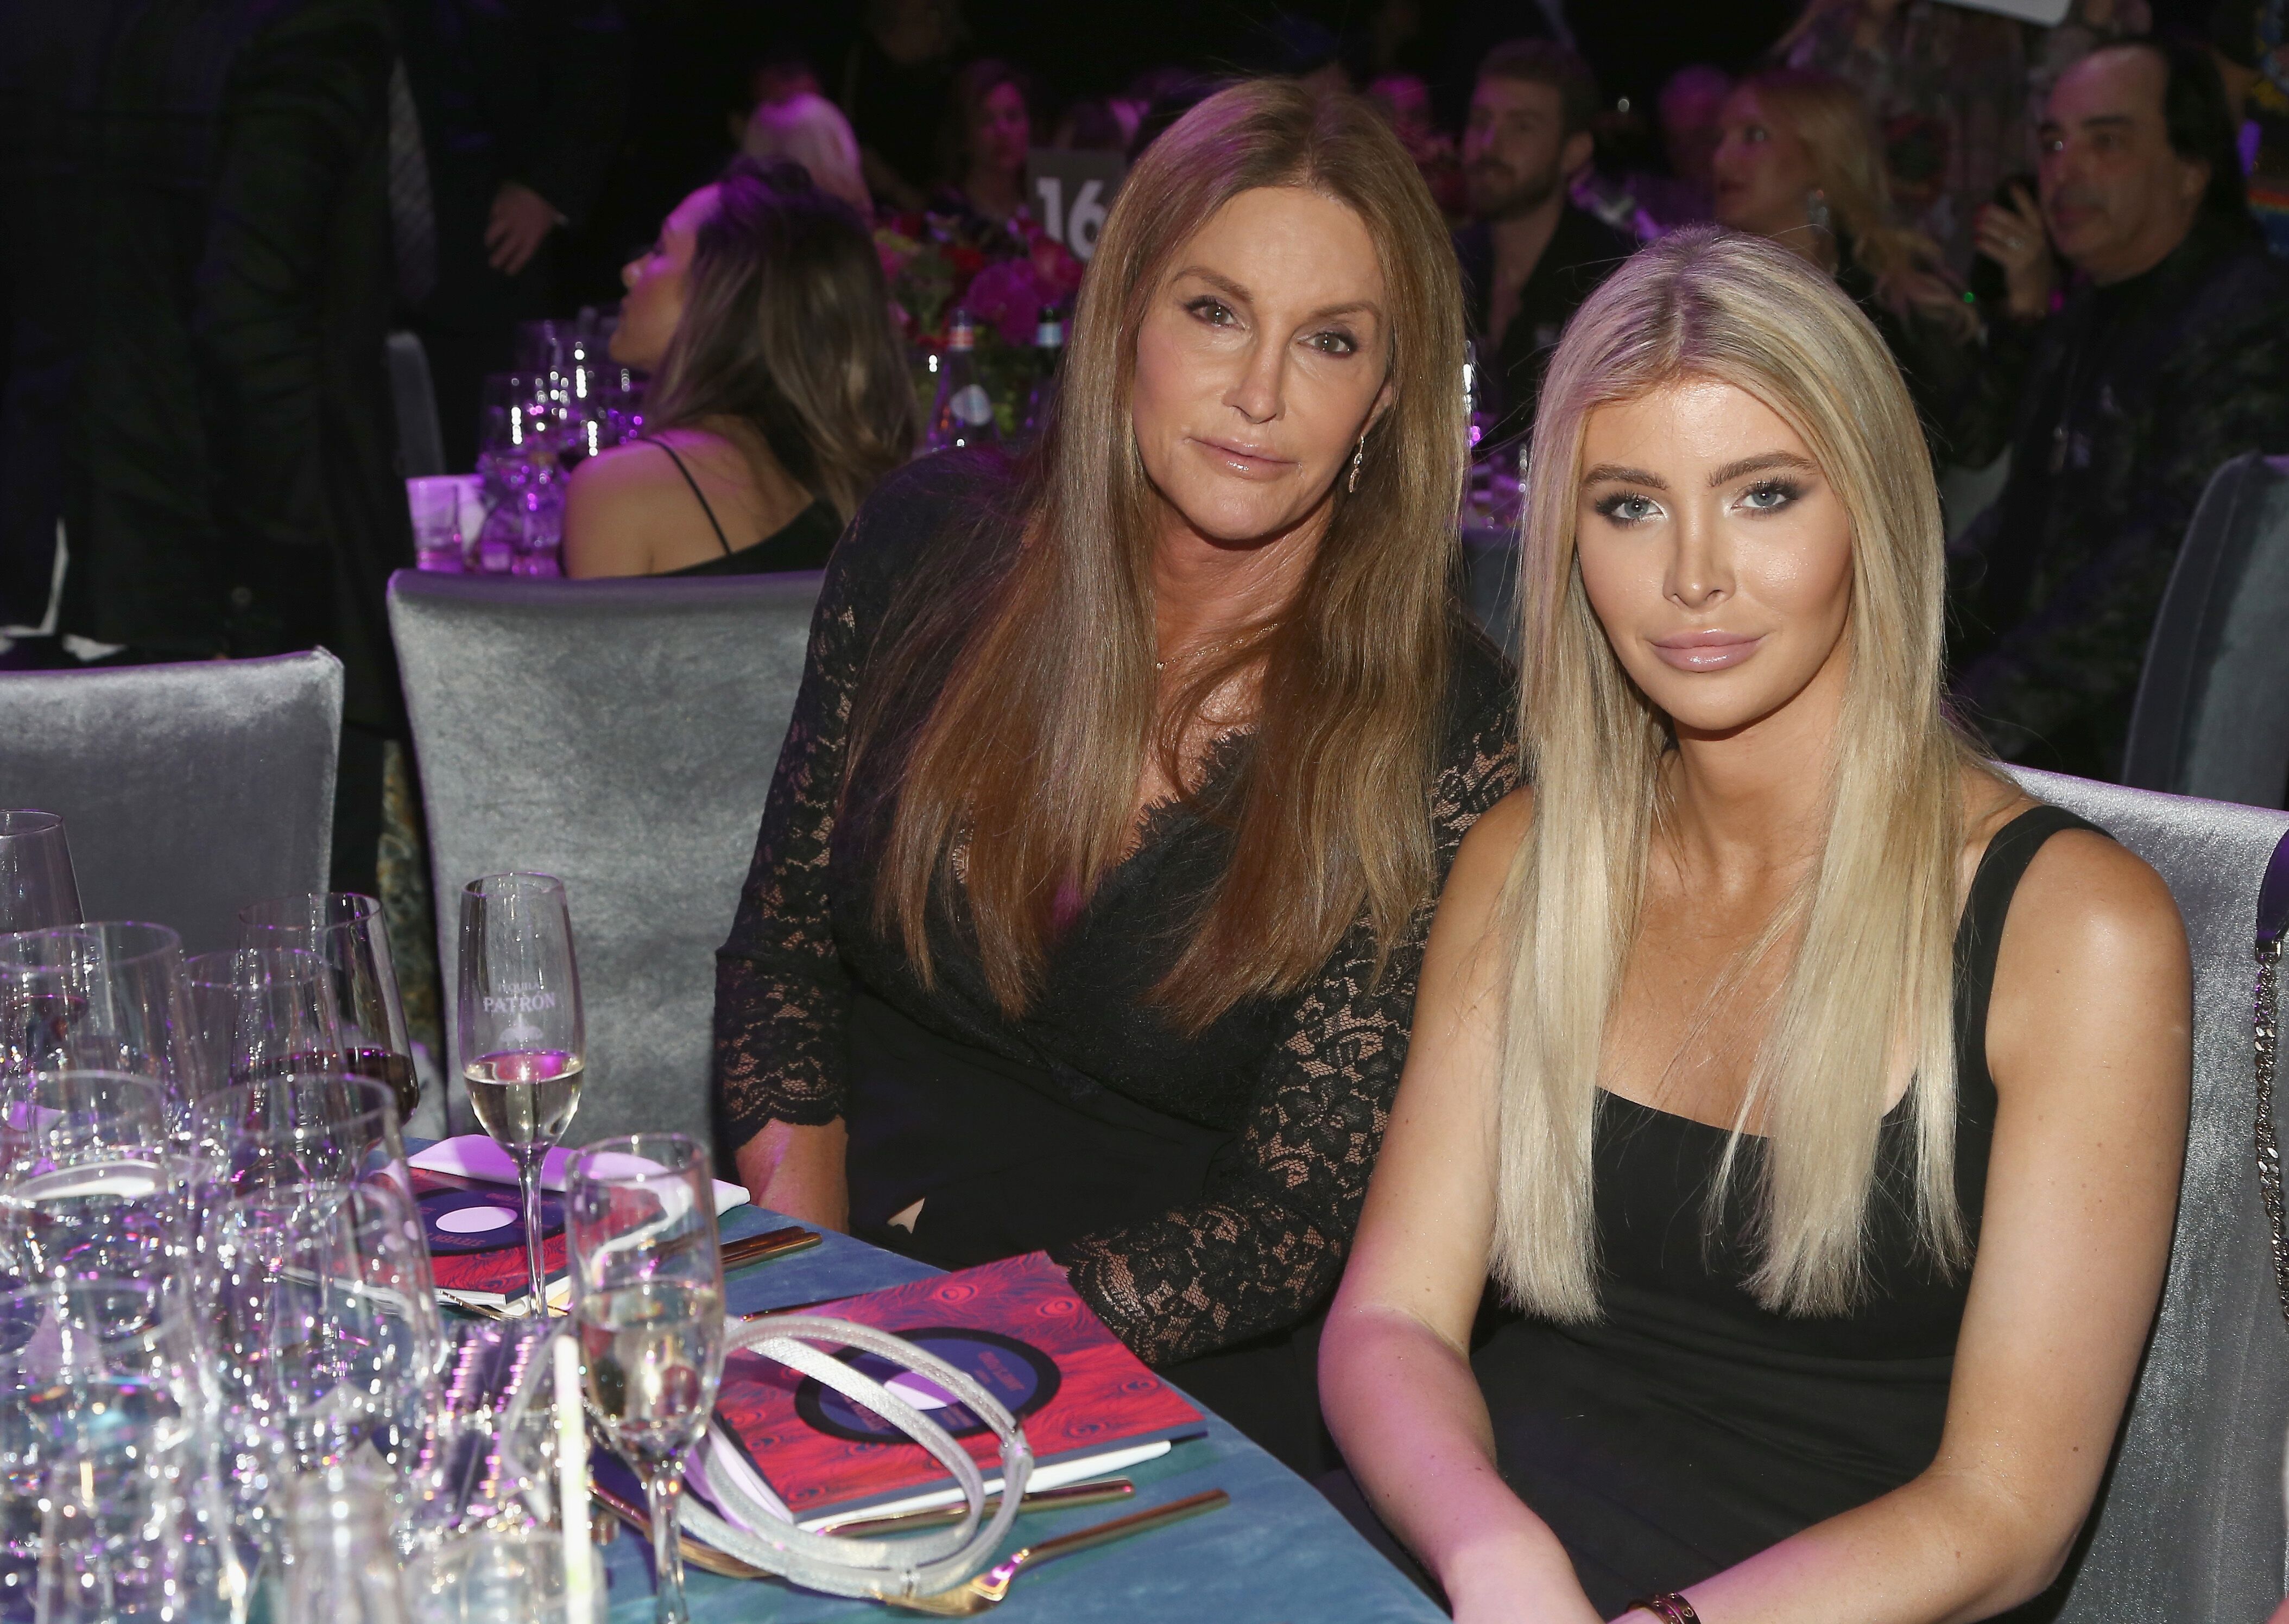 Caitlyn Jenner (L) and Sophia Hutchins at Steven Tyler and Live Nation presents Inaugural Janie's Fund Gala & GRAMMY Viewing Party at Red Studios in Los Angeles, California | Photo: Getty Images